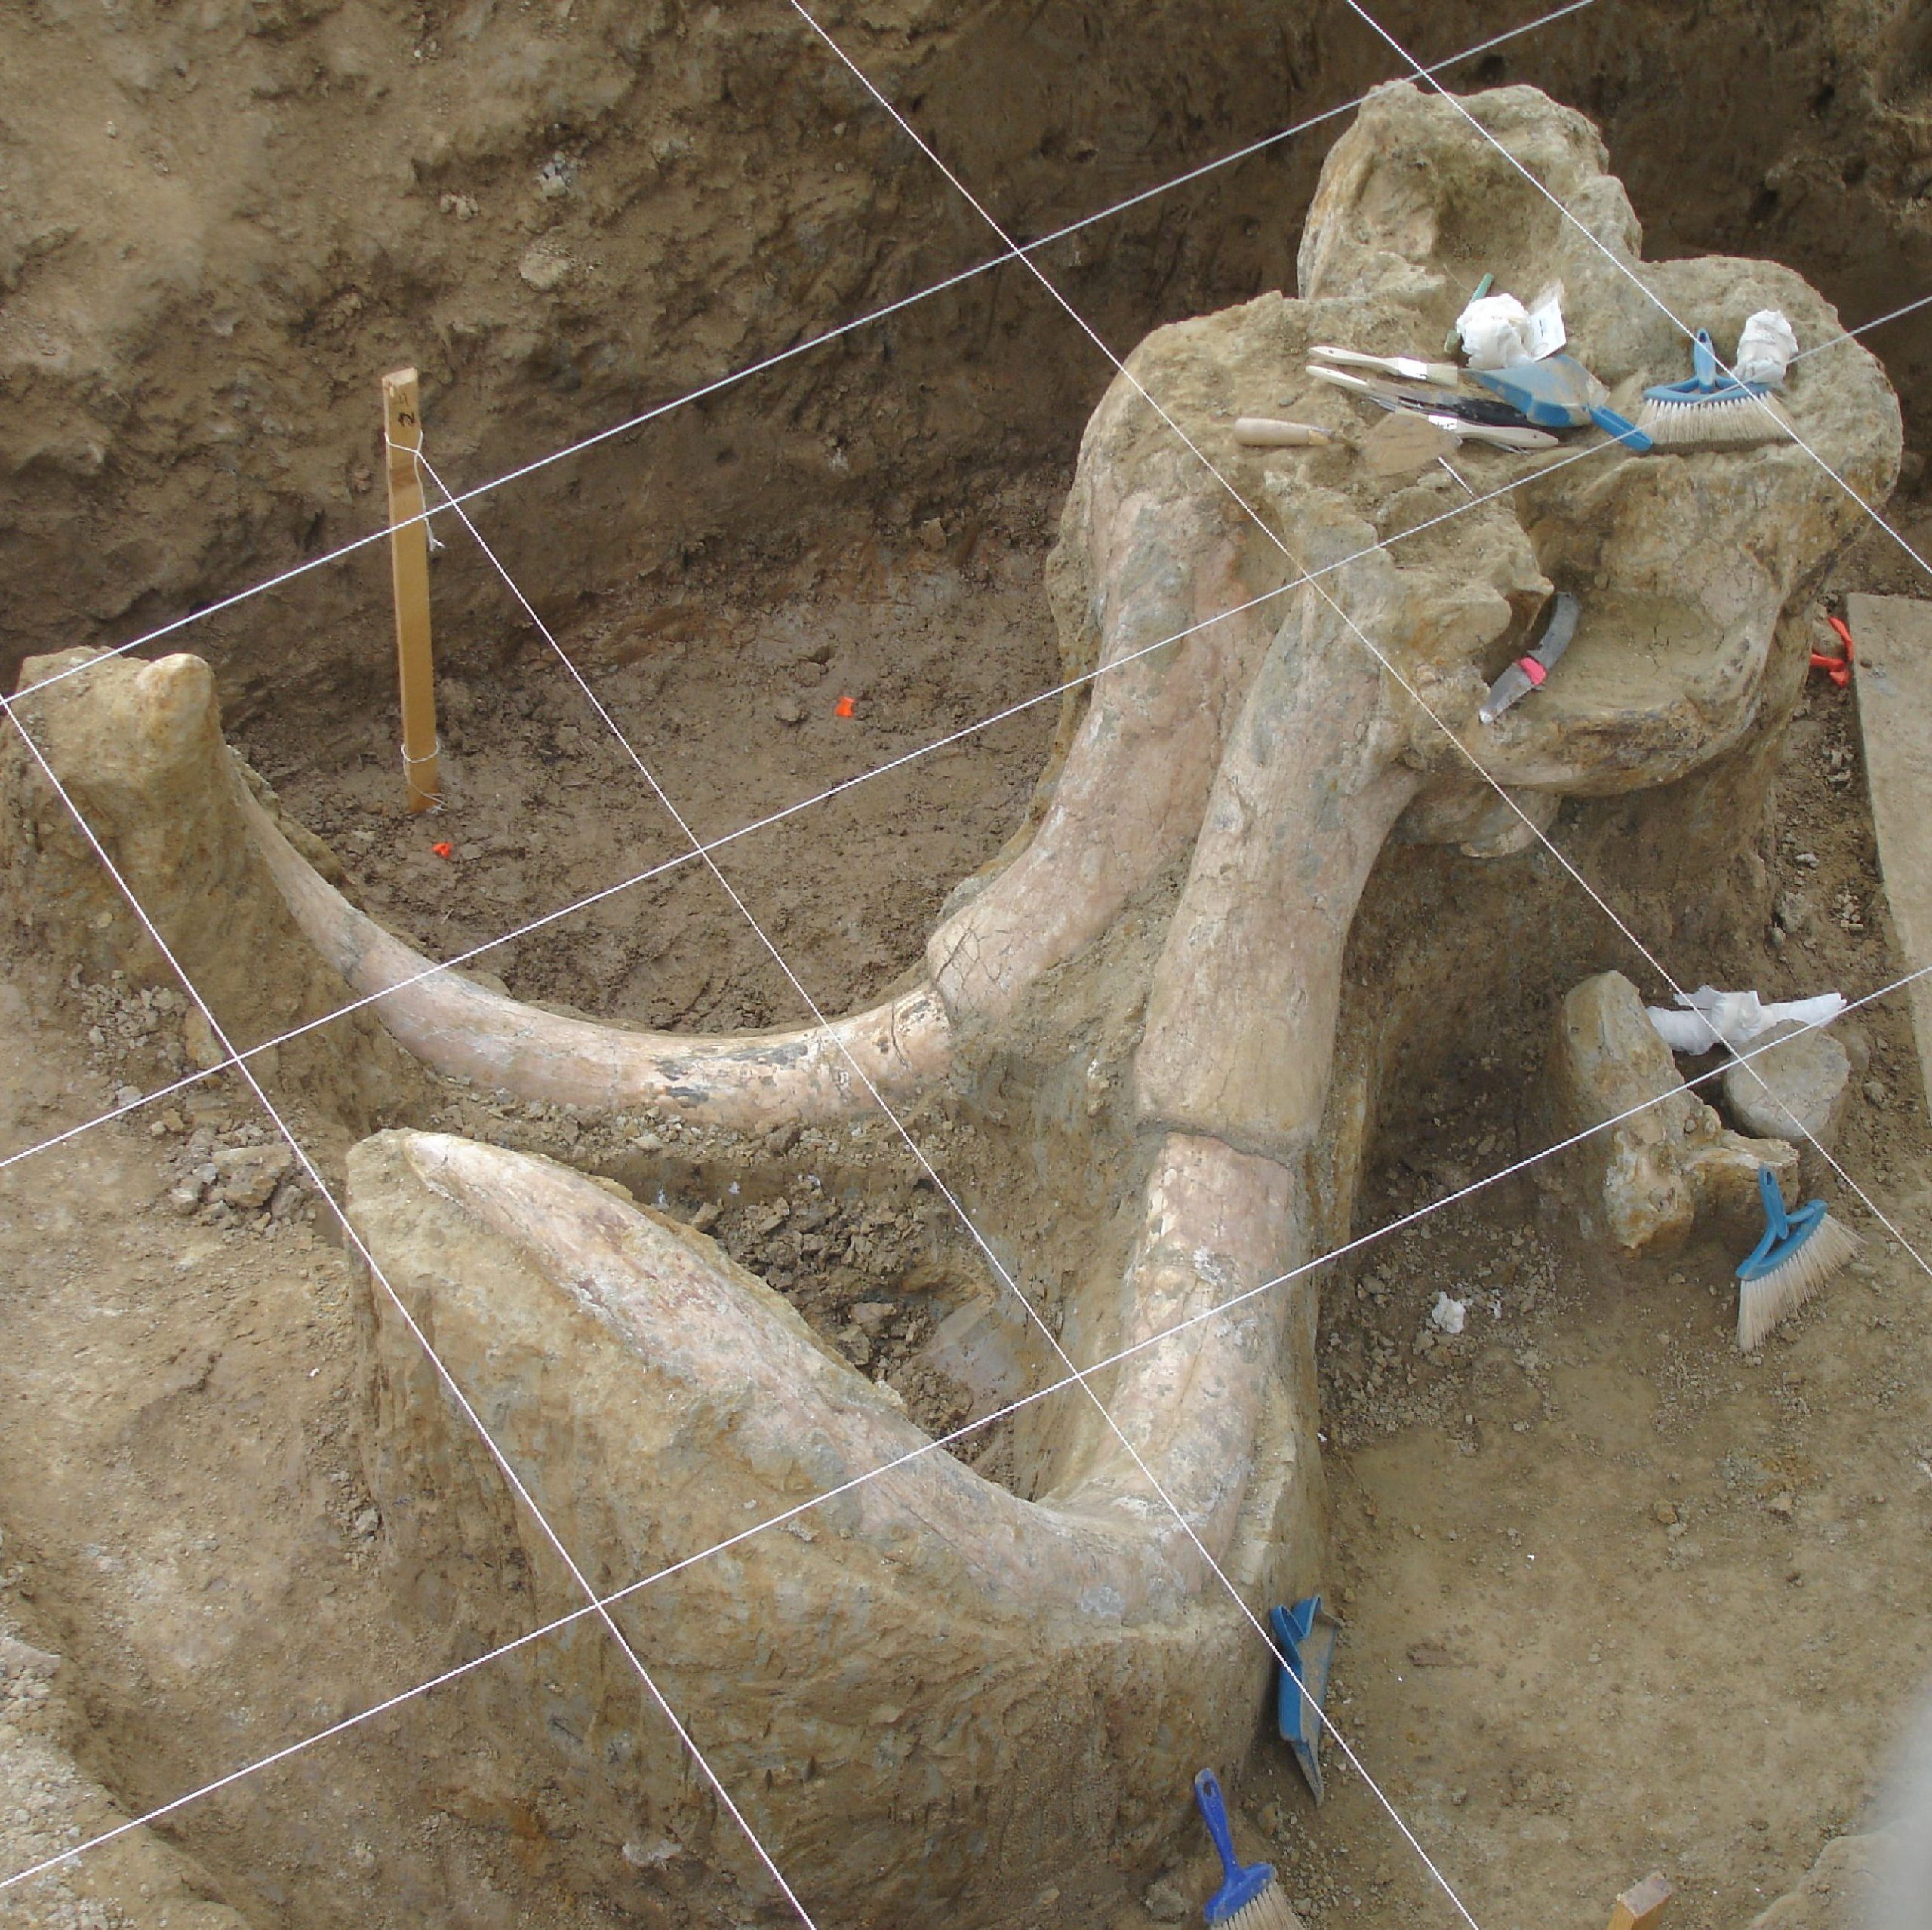 A dig site featuring a pair of excavated tusks and various archeological tools.